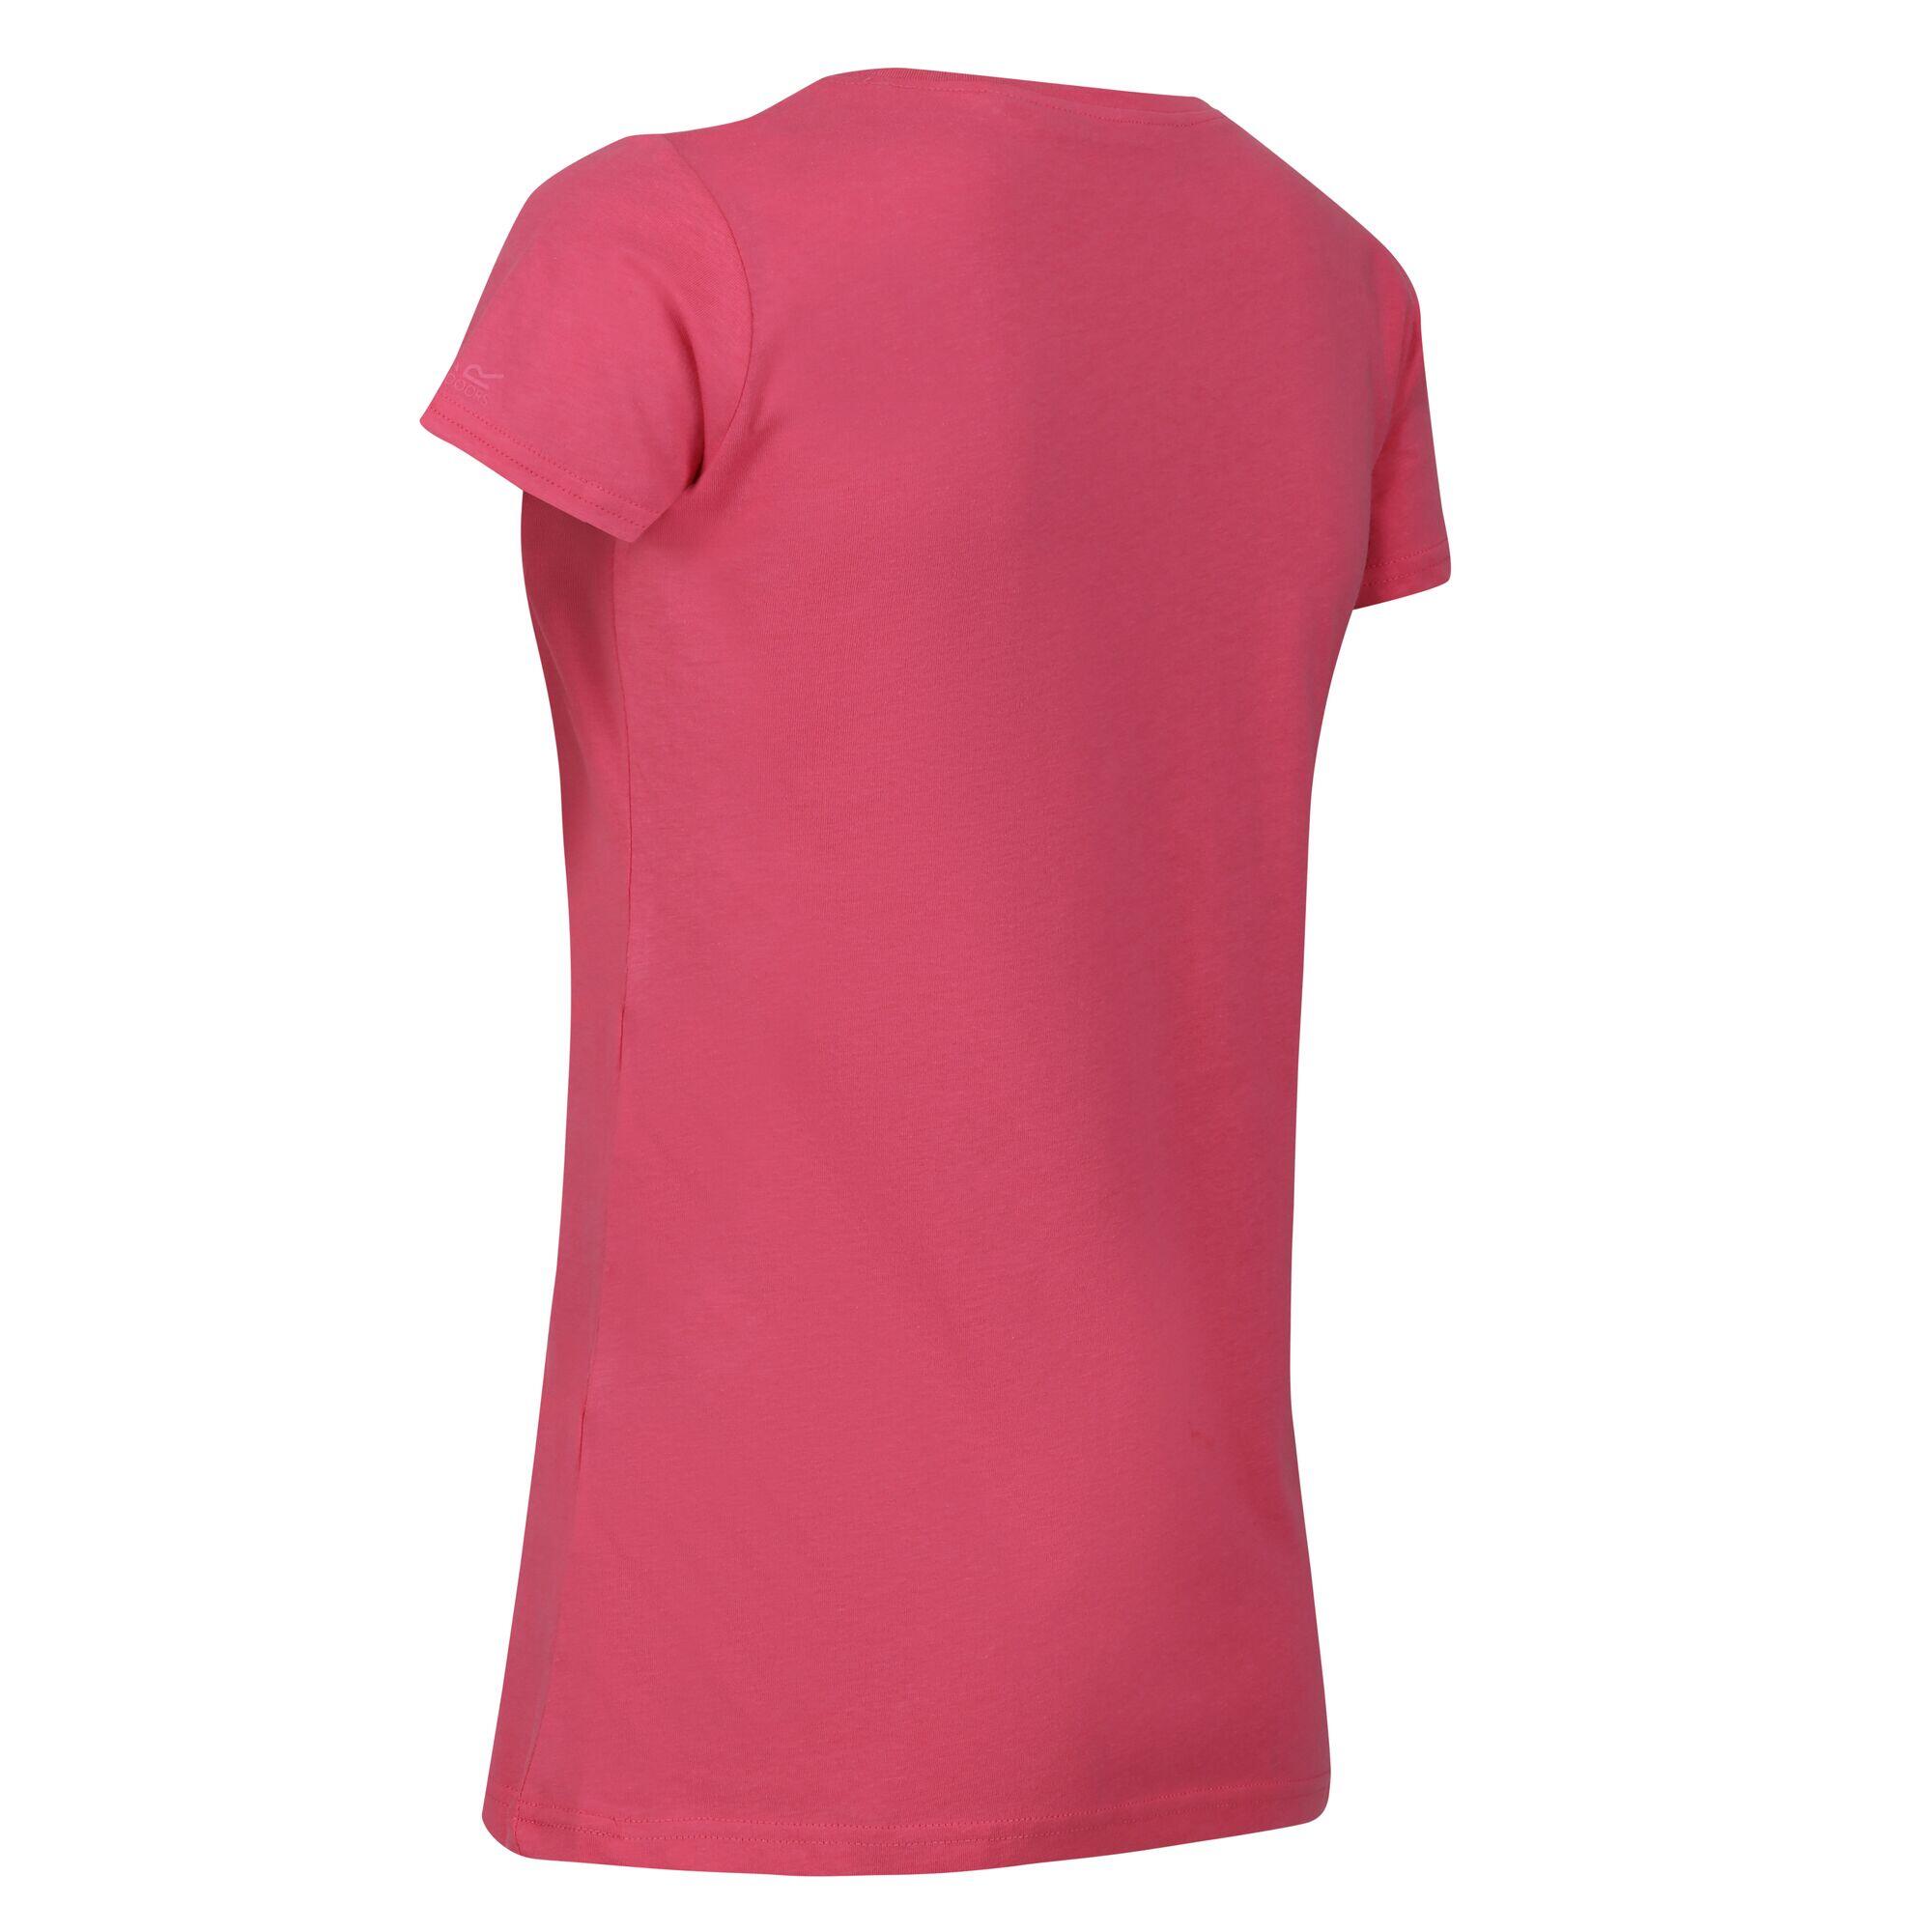 Women's Carlie Coolweave T-Shirt 5/5